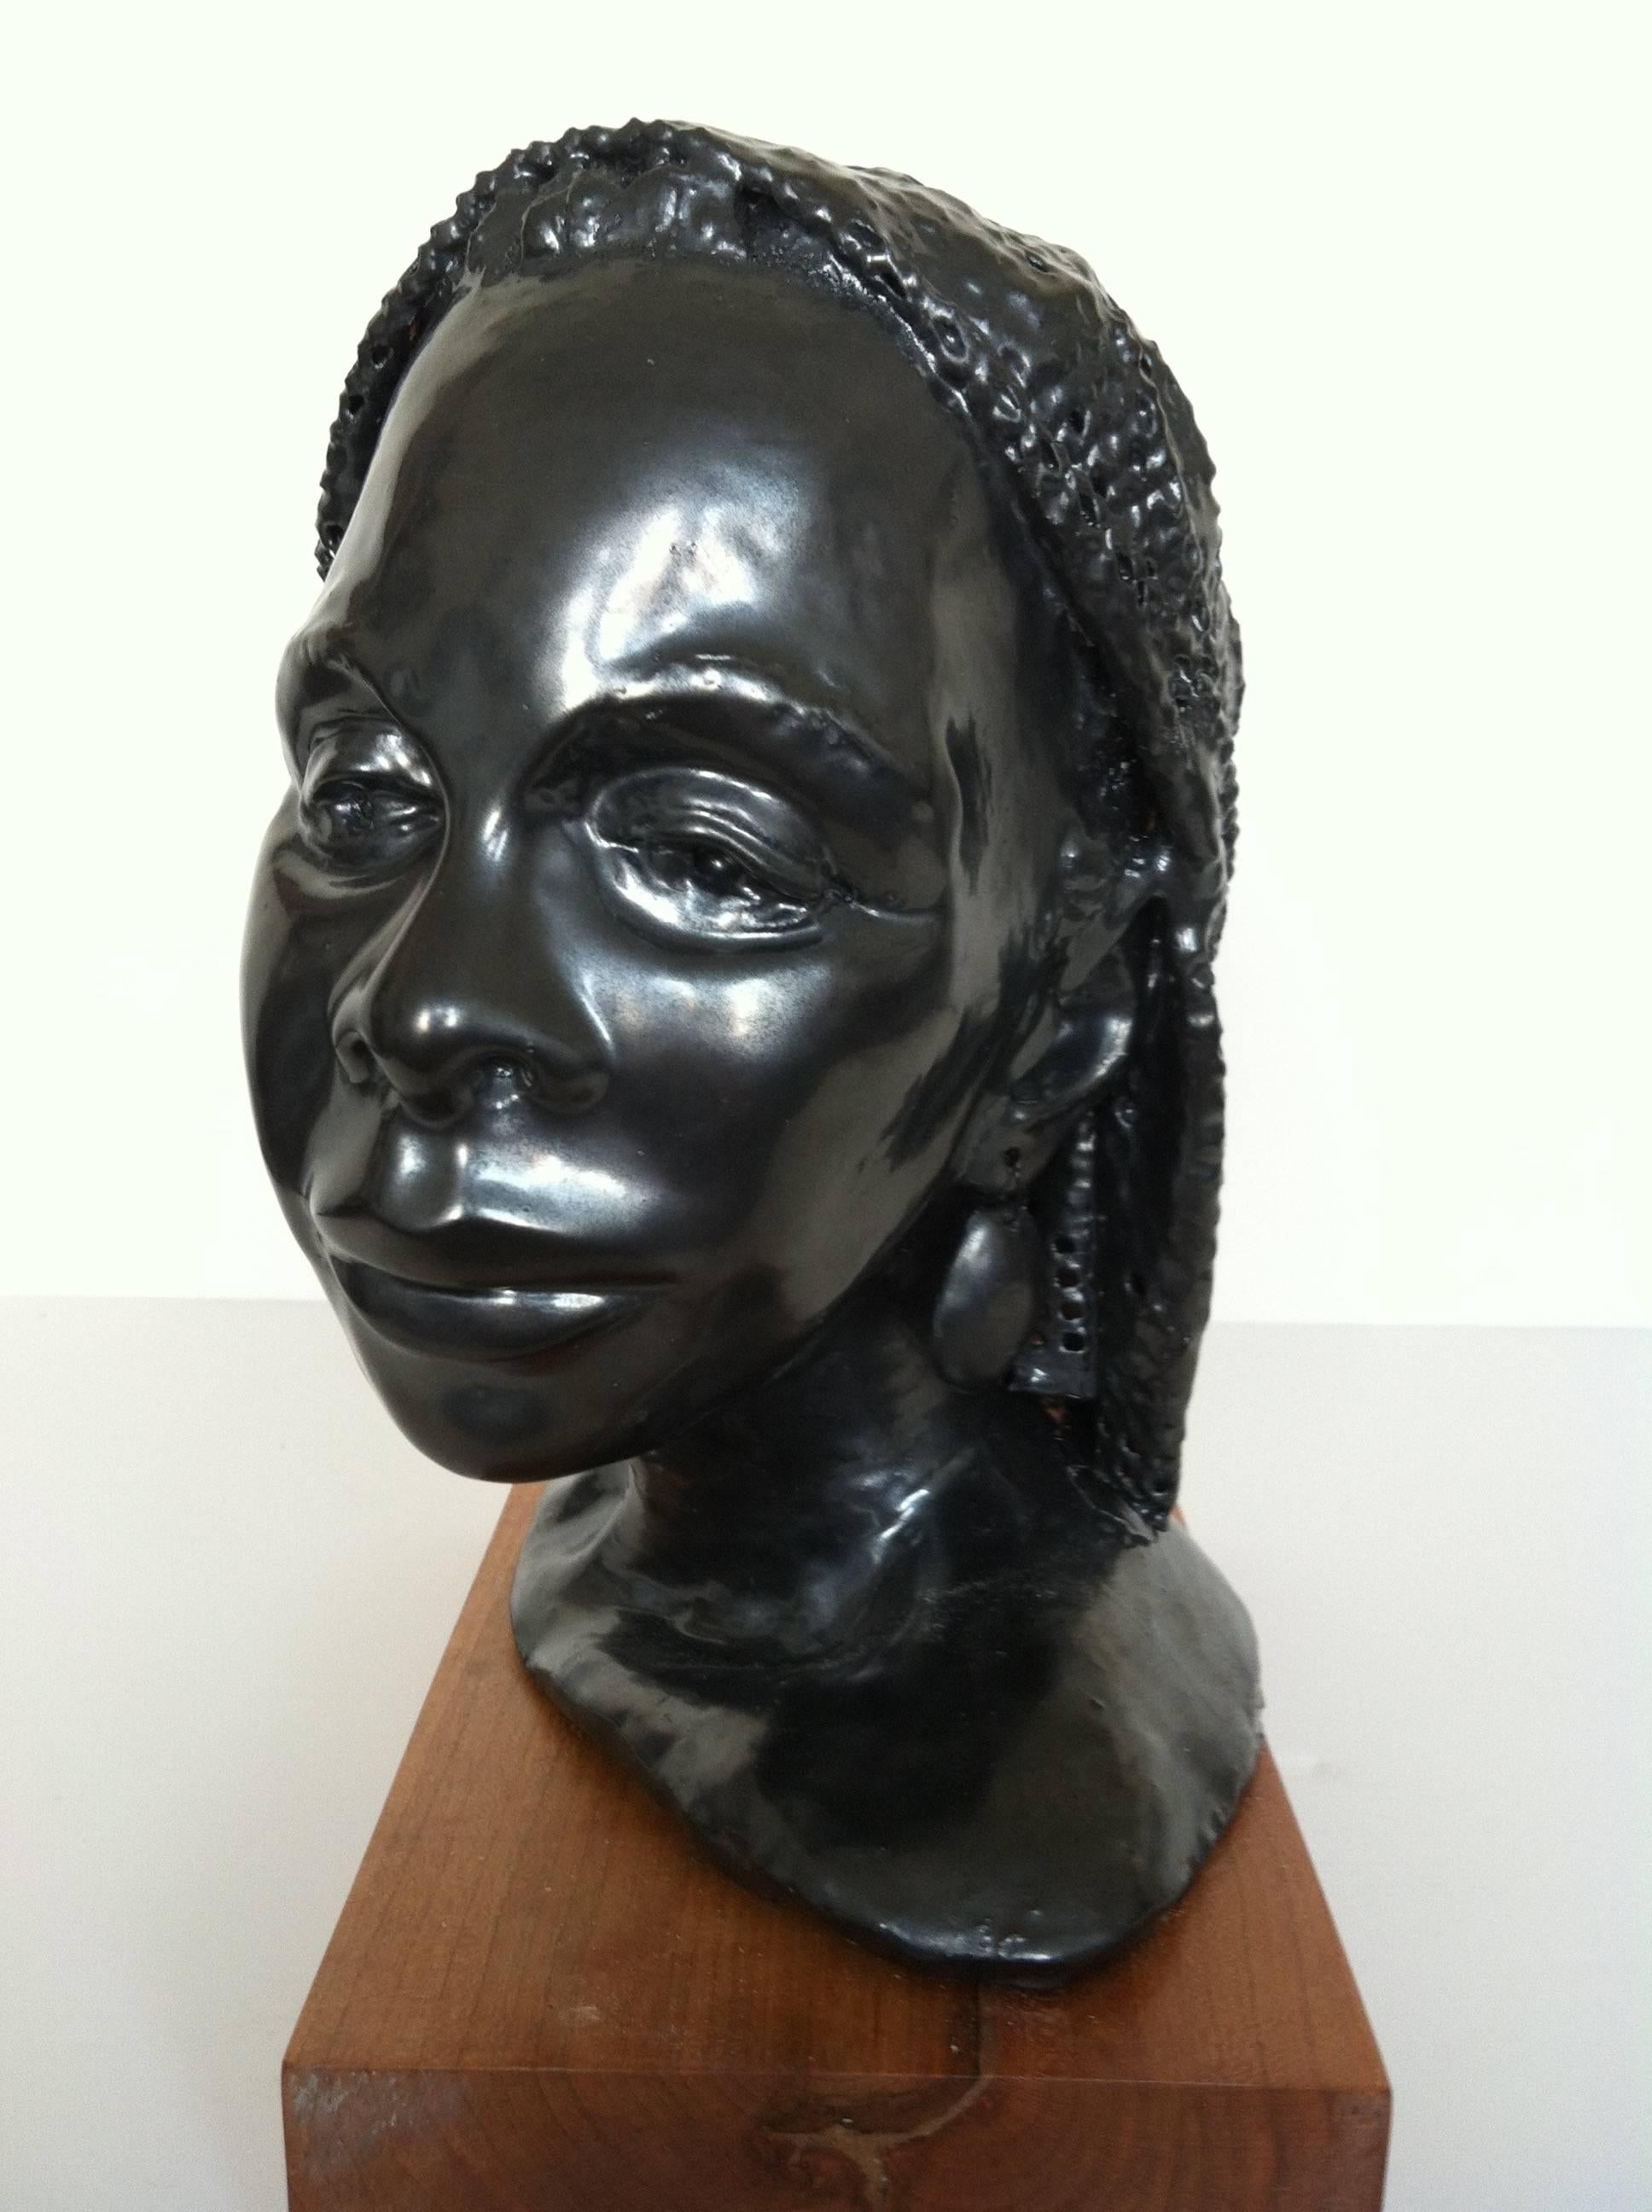 Nina Simone's Portrait - Brown Figurative Sculpture by Terry Rooney